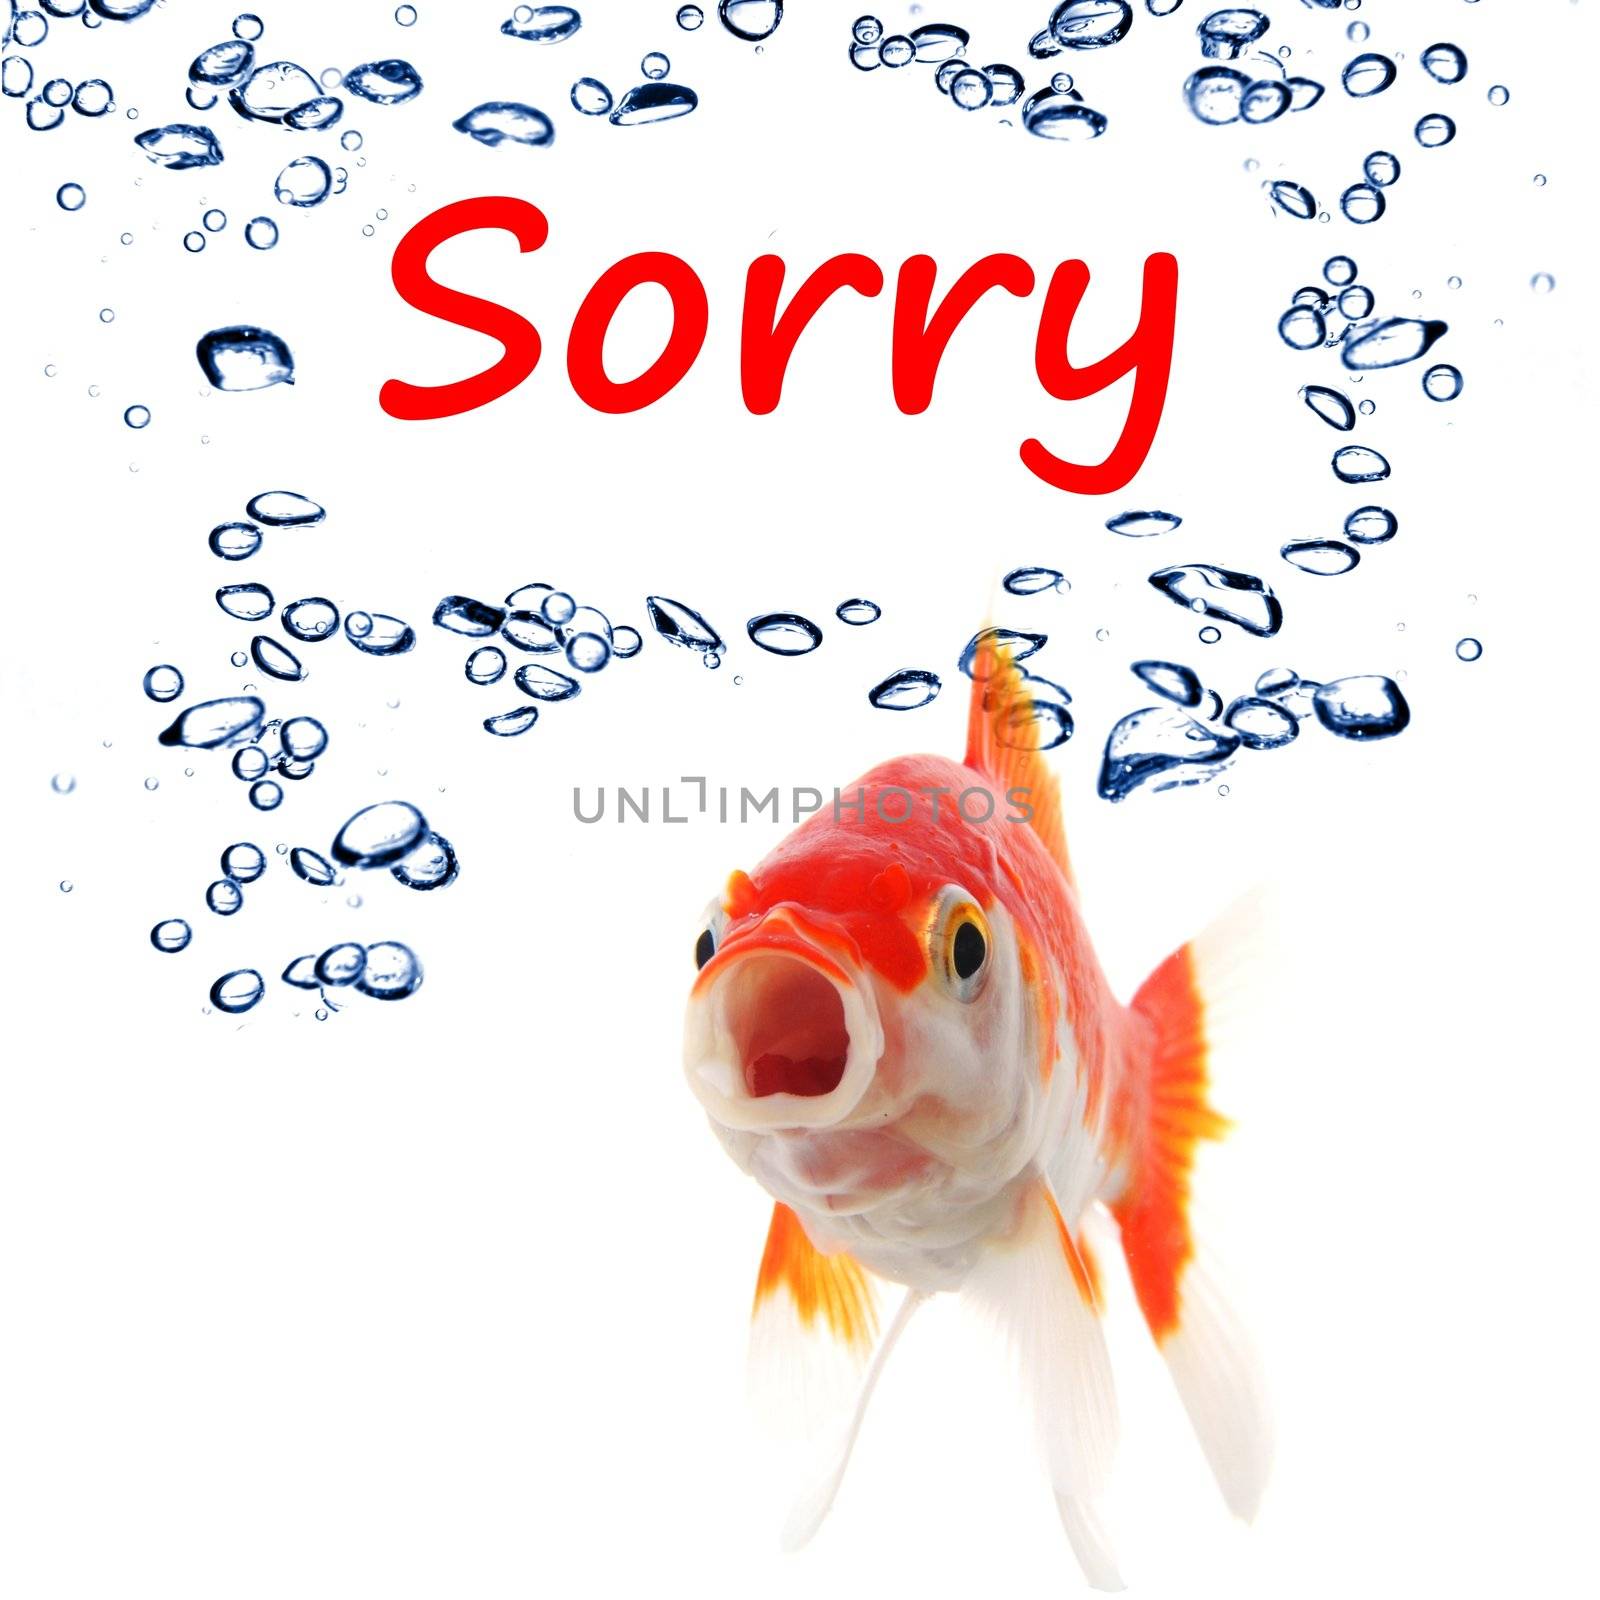 sorry concept with word and goldfish isolated on white background